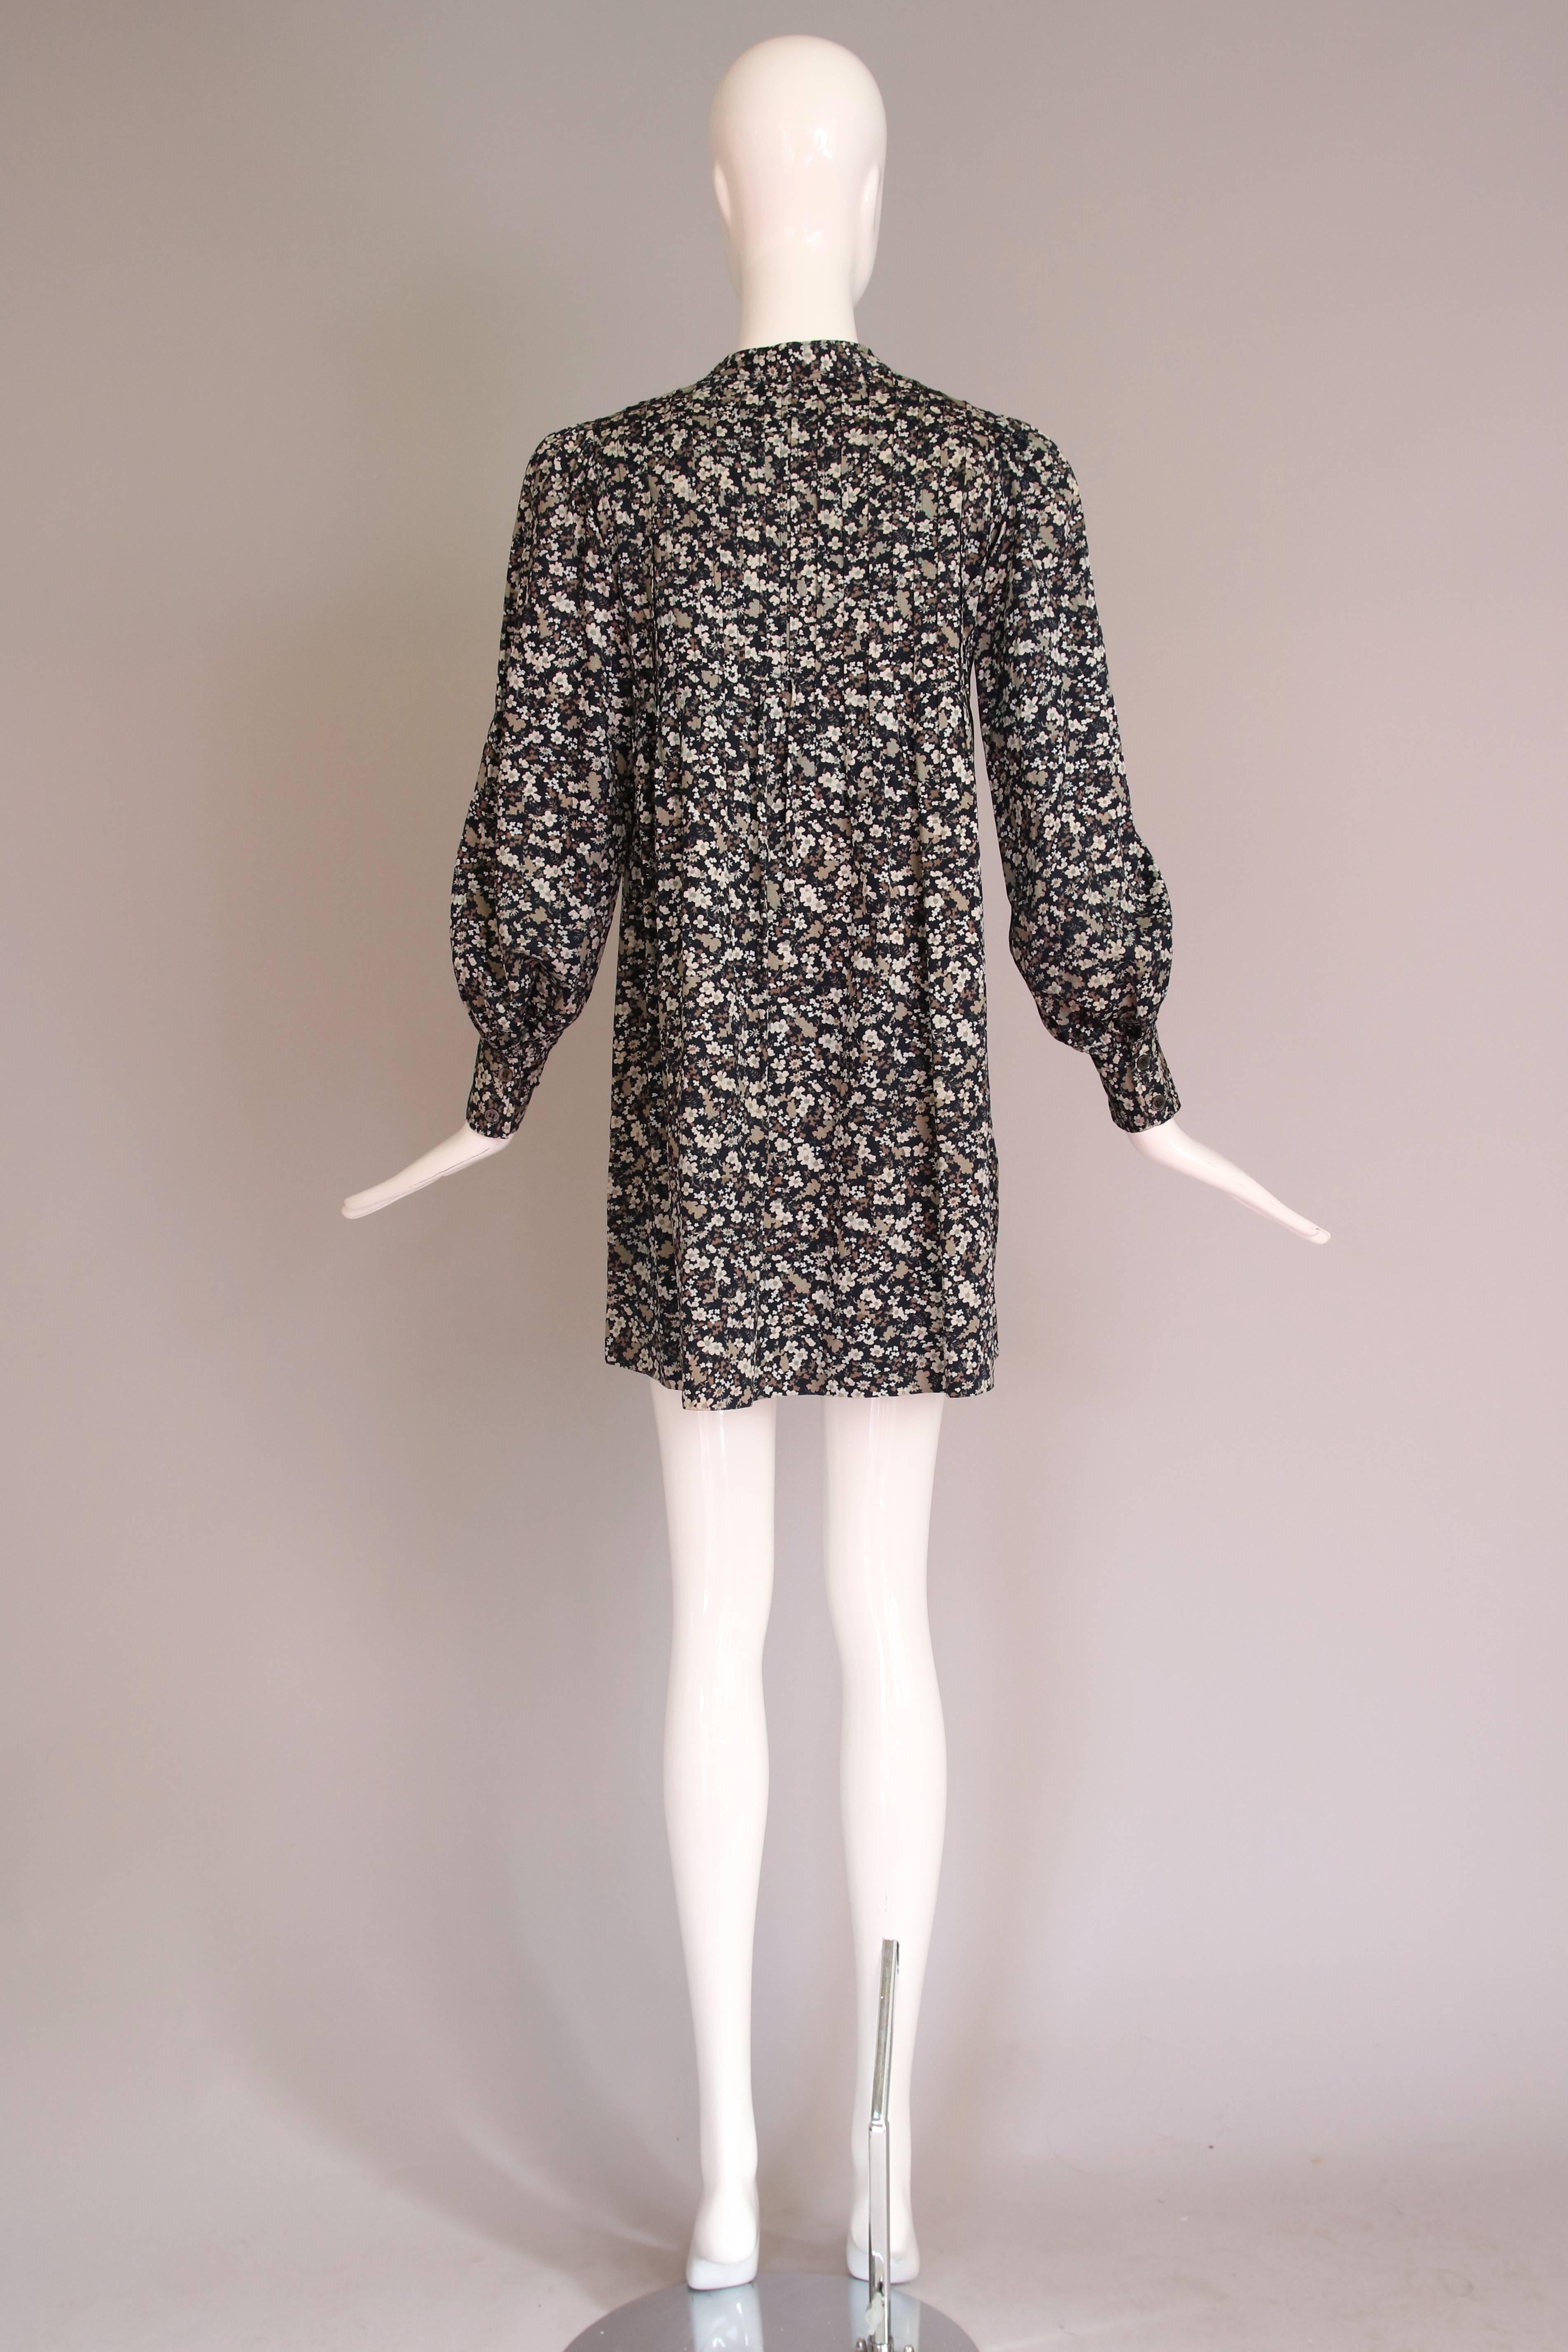 1970's Yves Saint Laurent Cotton Floral Tunic Top w/Smocking 1